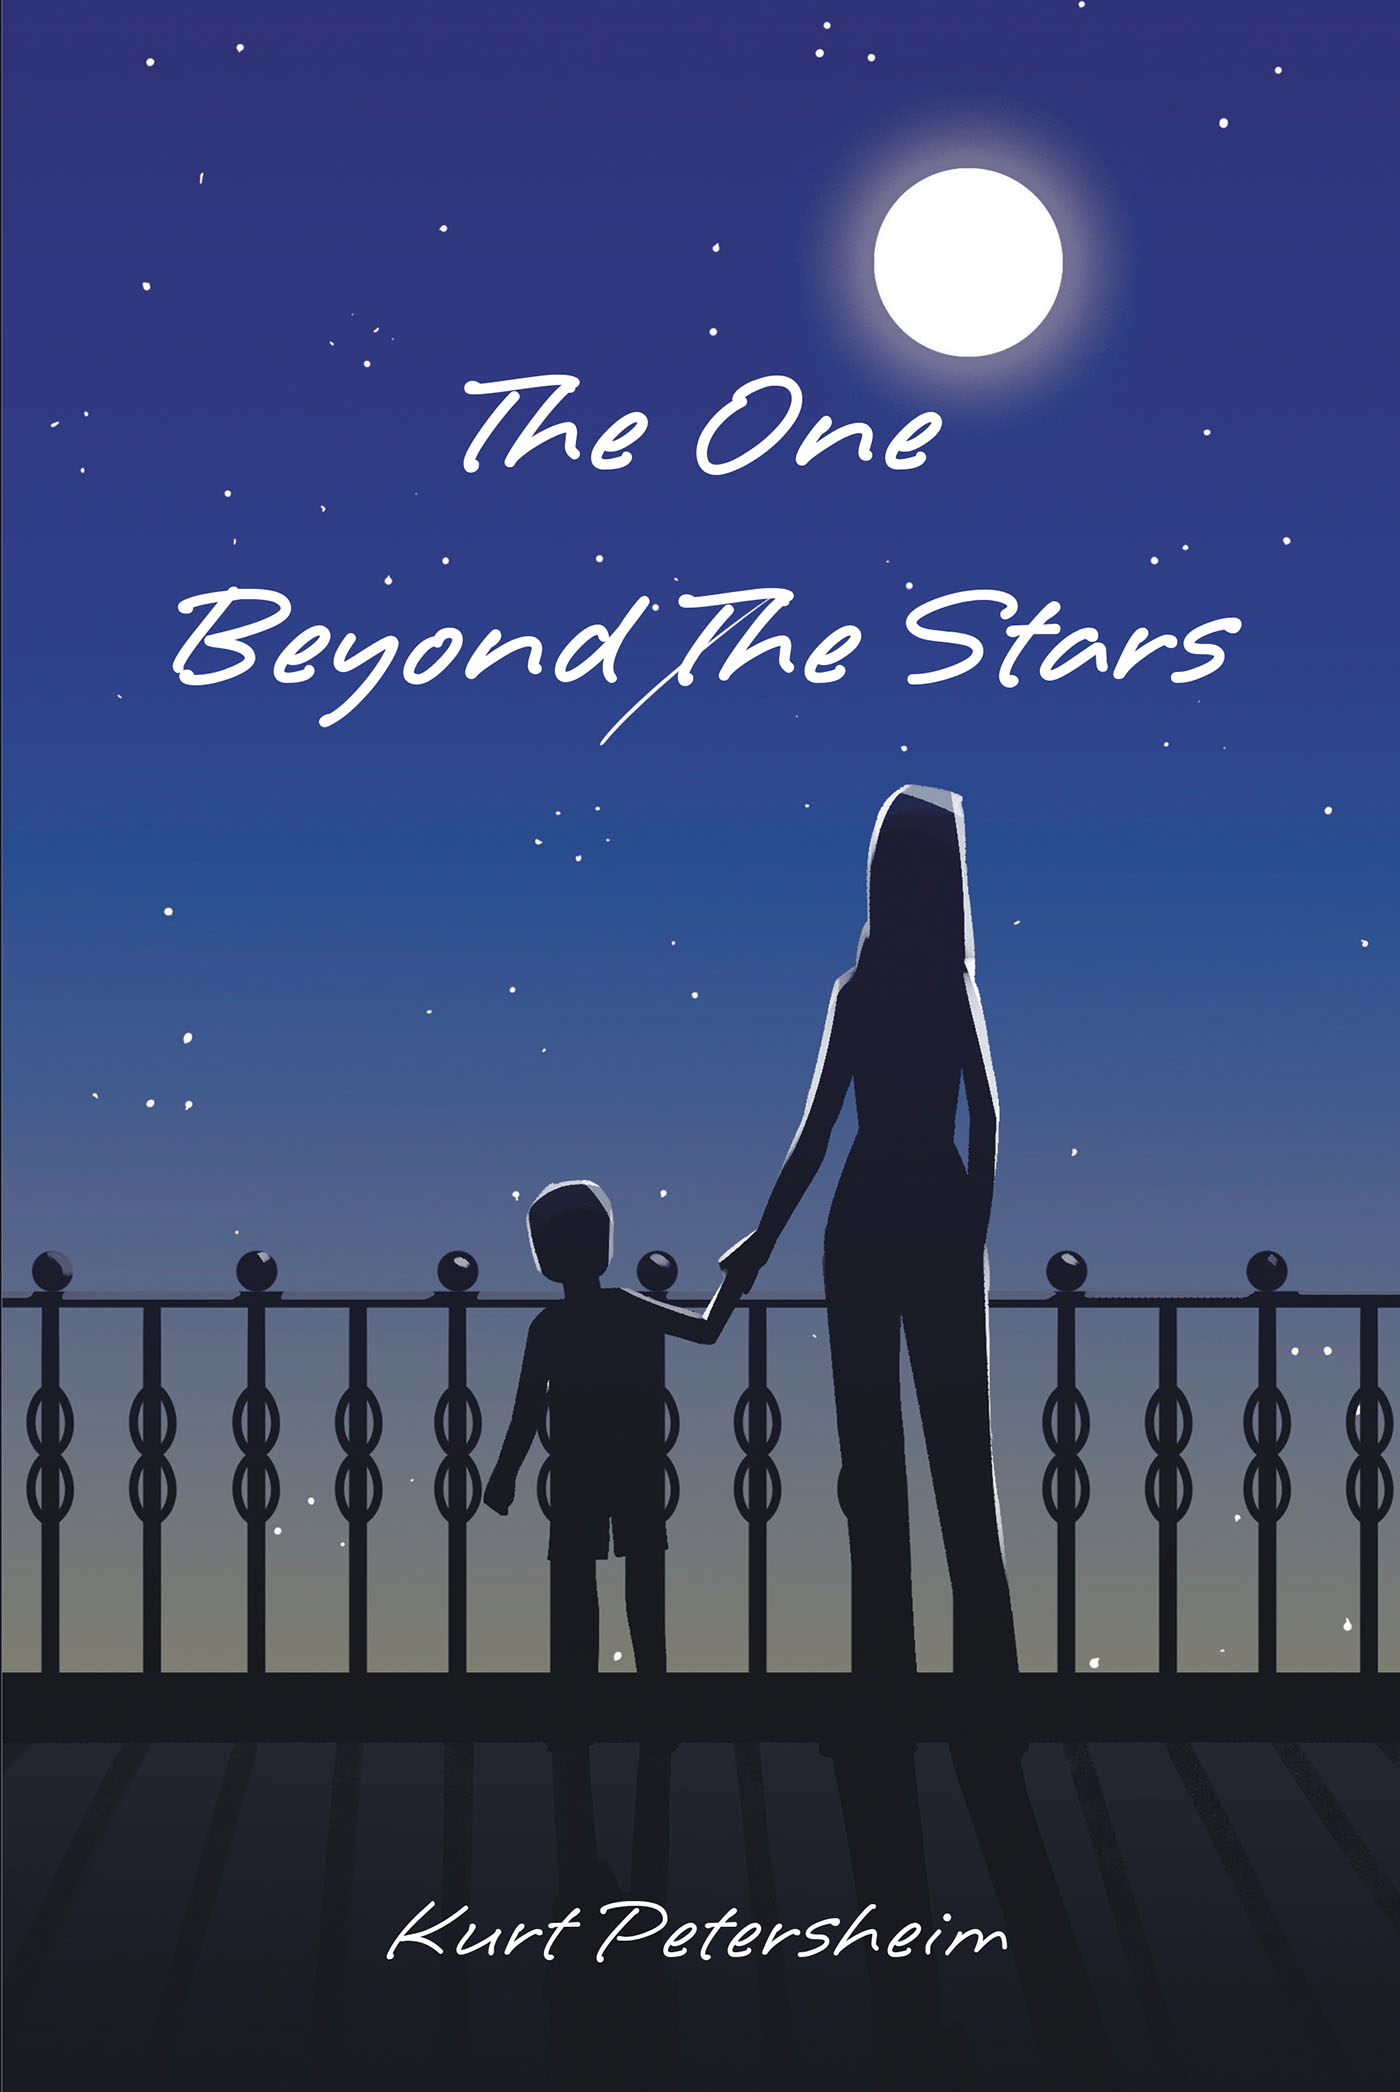 Kurt Petersheim’s Newly Released "The One Beyond The Stars" is an Uplifting and Lyrical Work for Young Imaginations